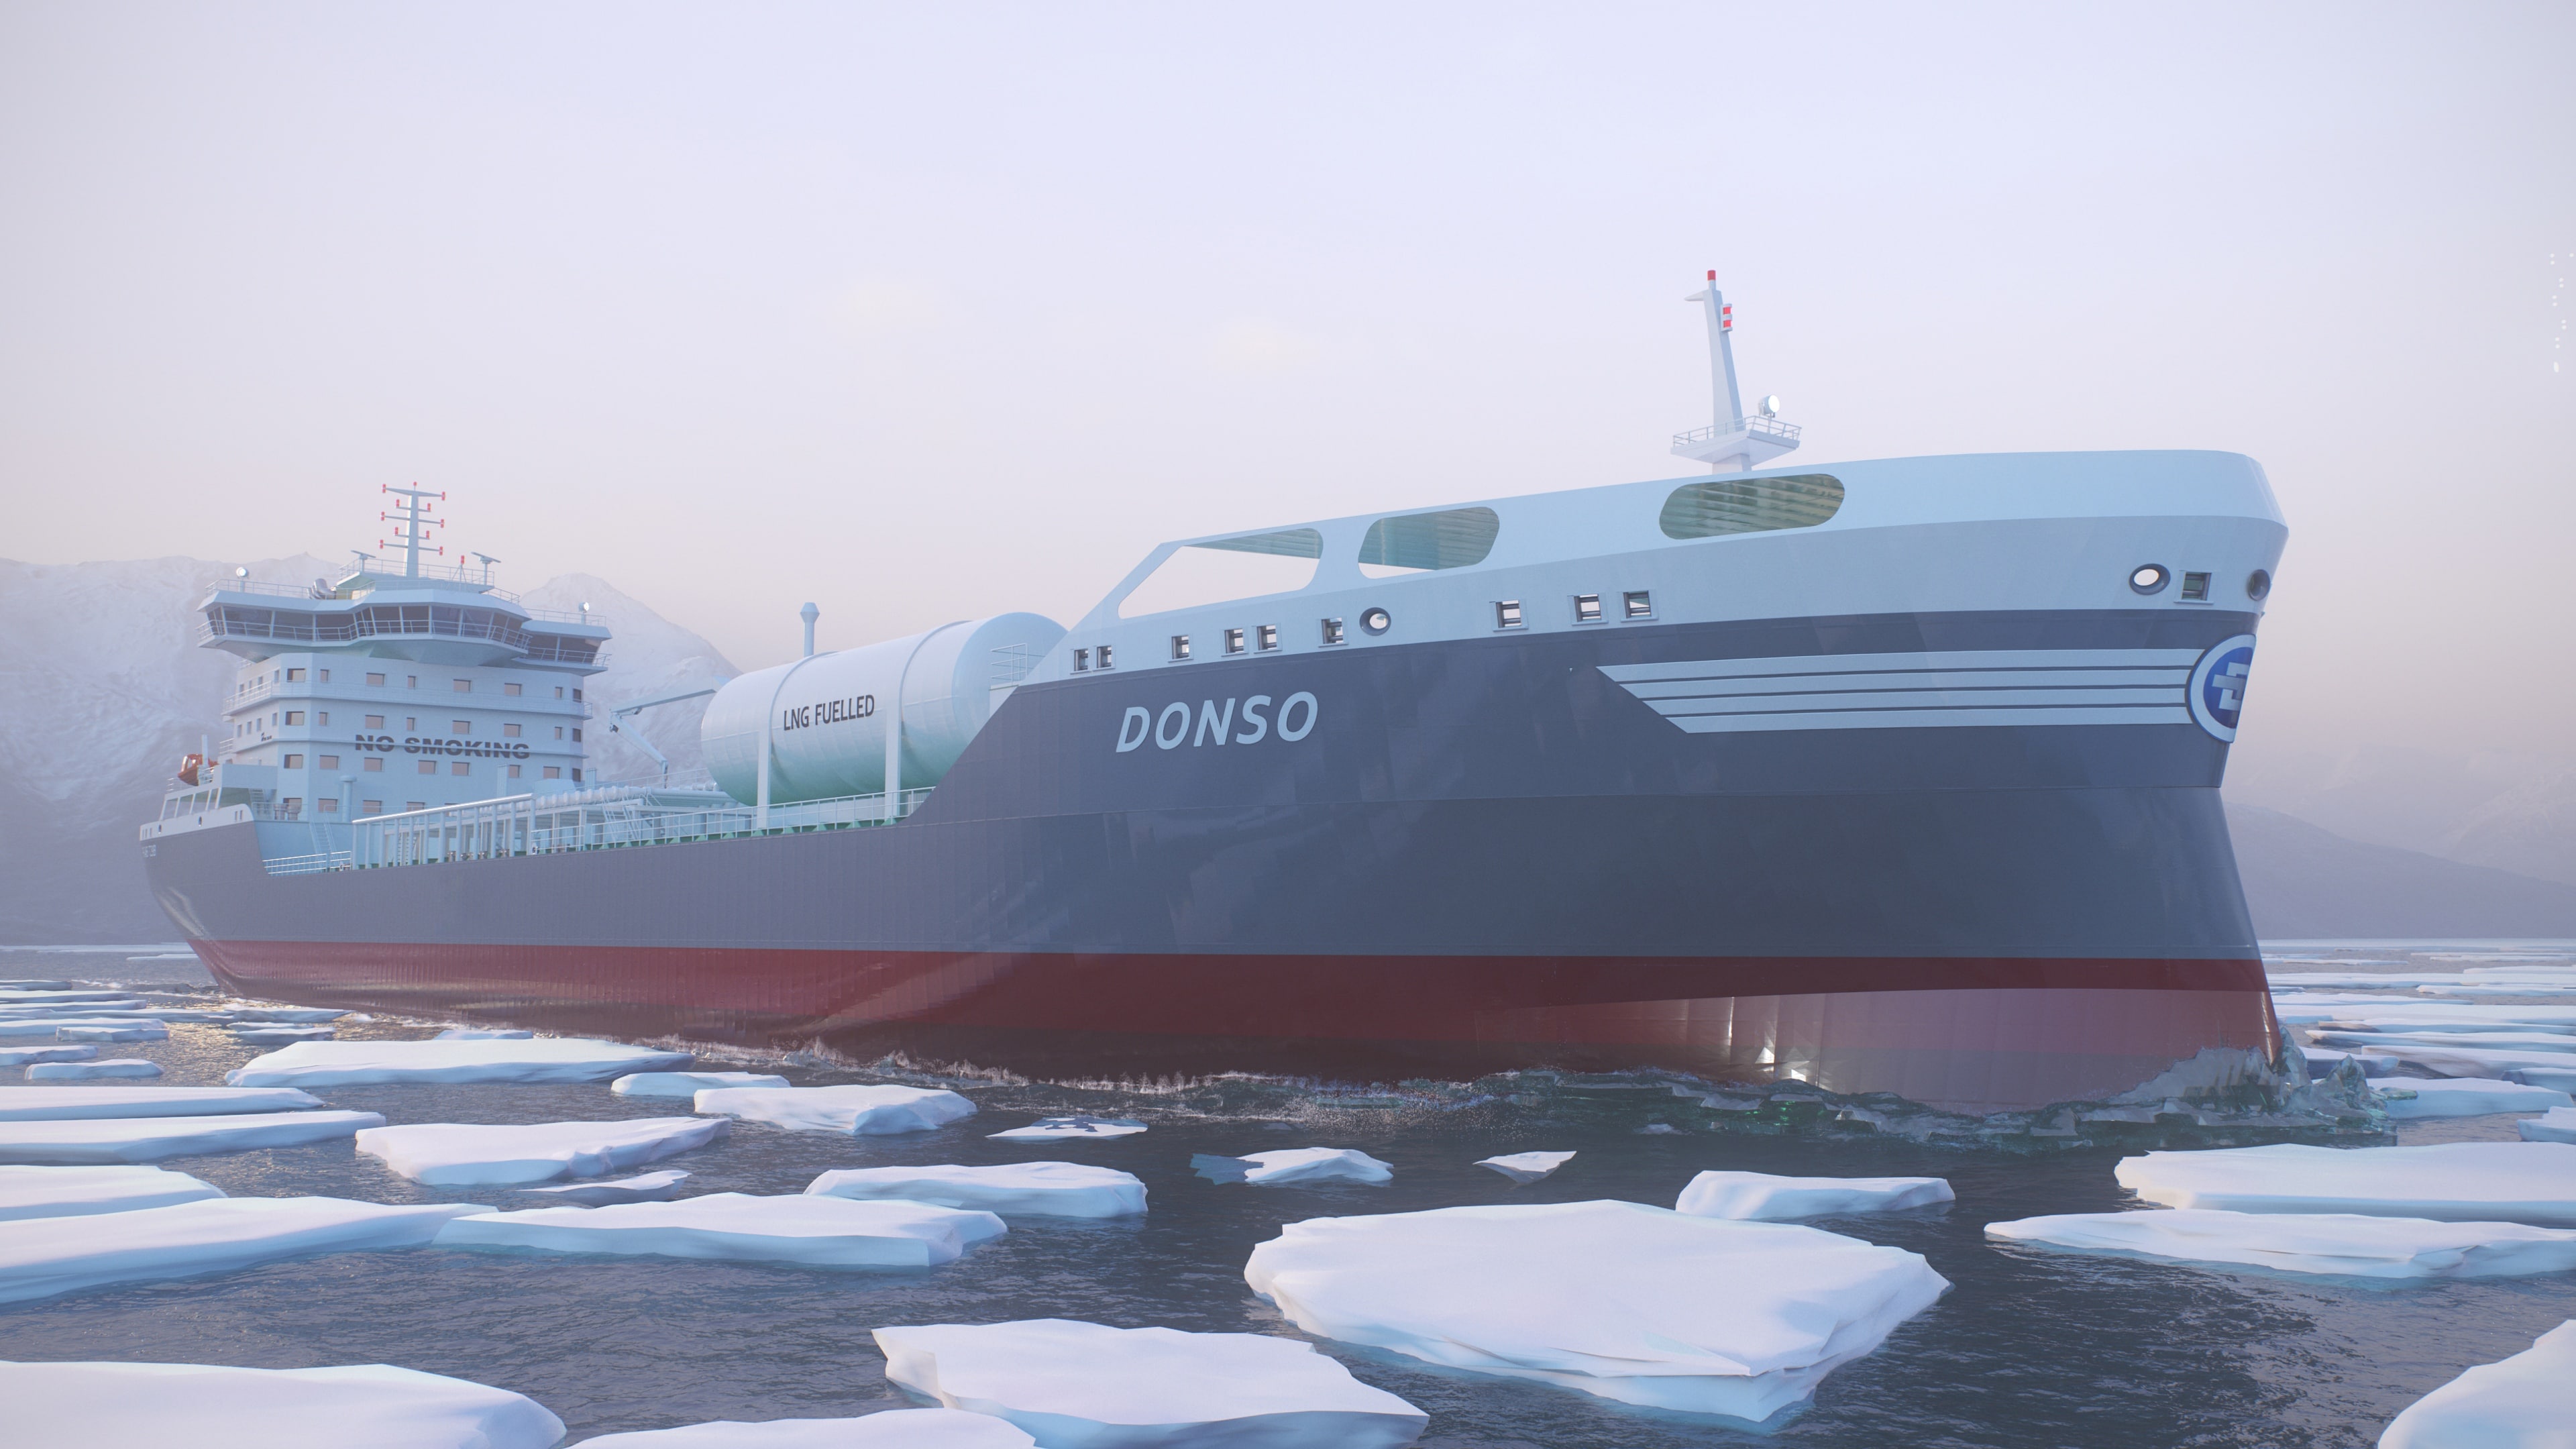 FKAB: Keel Laying of Donsötank 22 000 DWT tankers